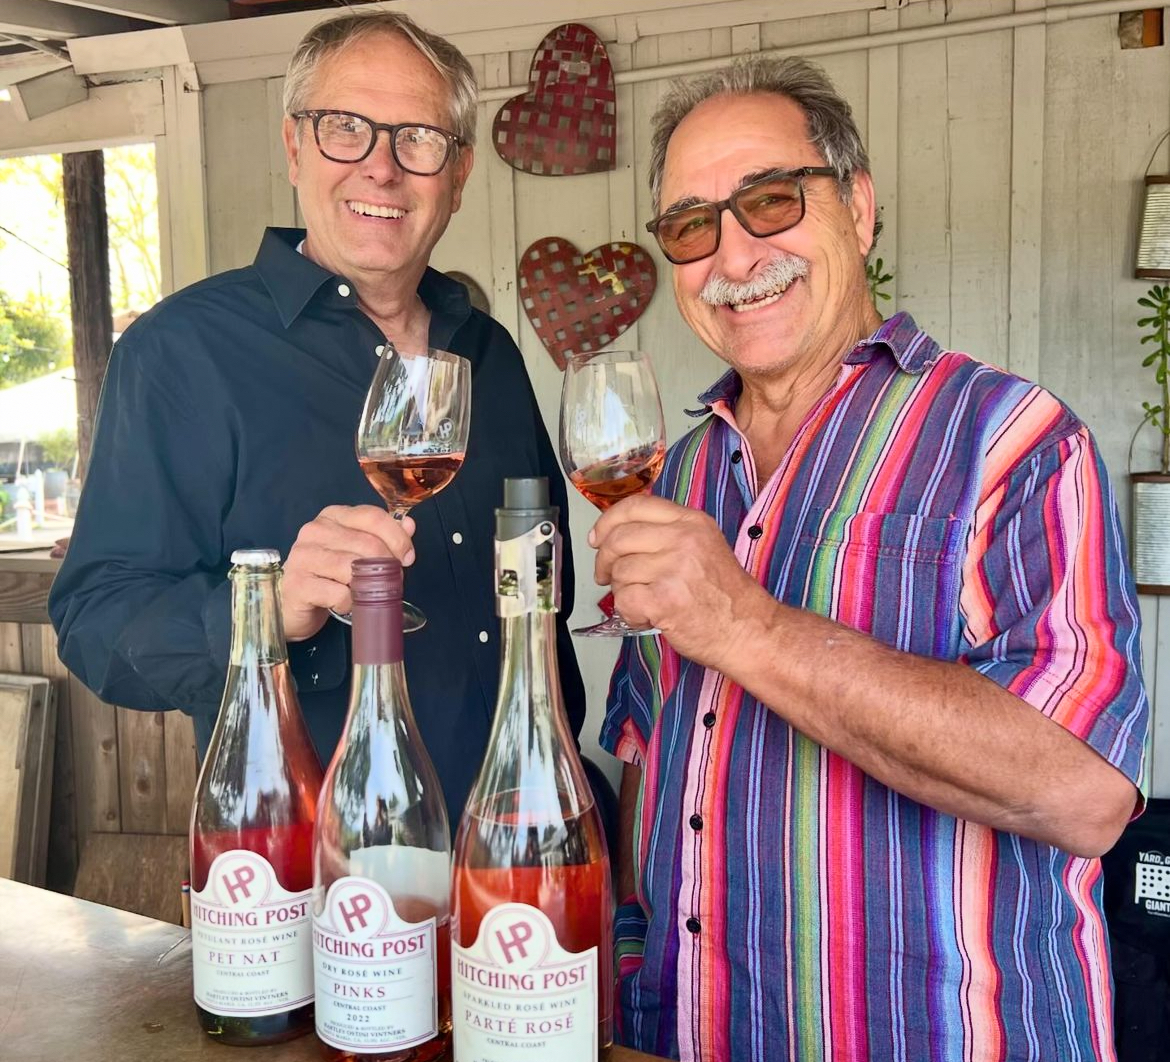 Cheers to Pinks and Parté Rosé! Our HP Wines #TastingRoom is open: Wednesday - Thursday 11:30am to 5:00pm Friday - Sunday, 11:30am to 7:30pm #HP2 #hitchingpost2 #HPWines #Buellton Hpwines.com